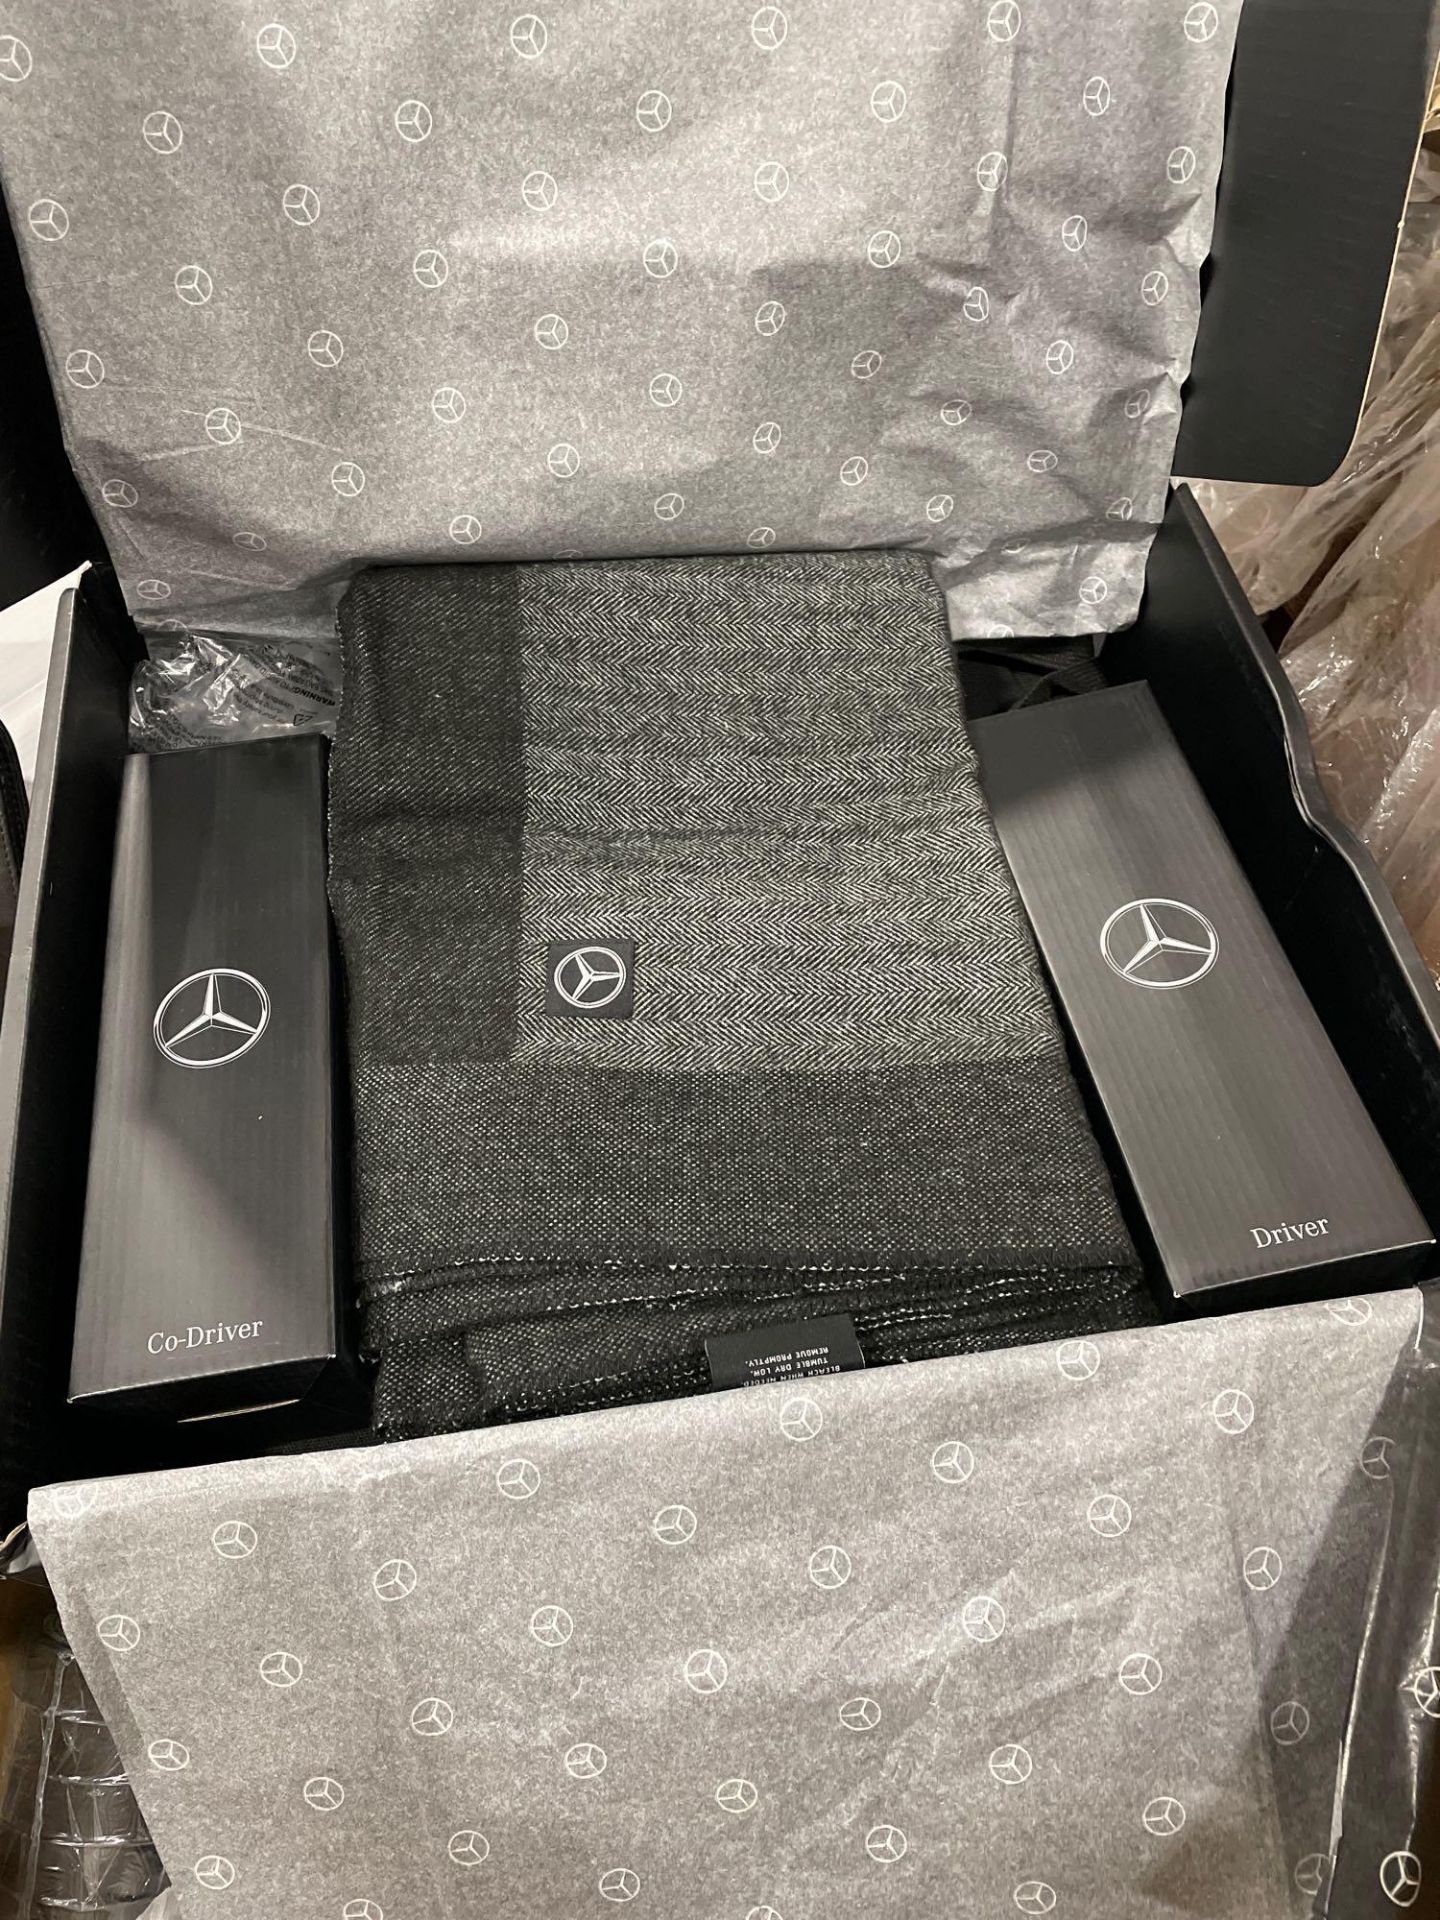 Mercedes Benz Thank You Package, Motorcycle Grips, and More - Image 6 of 16